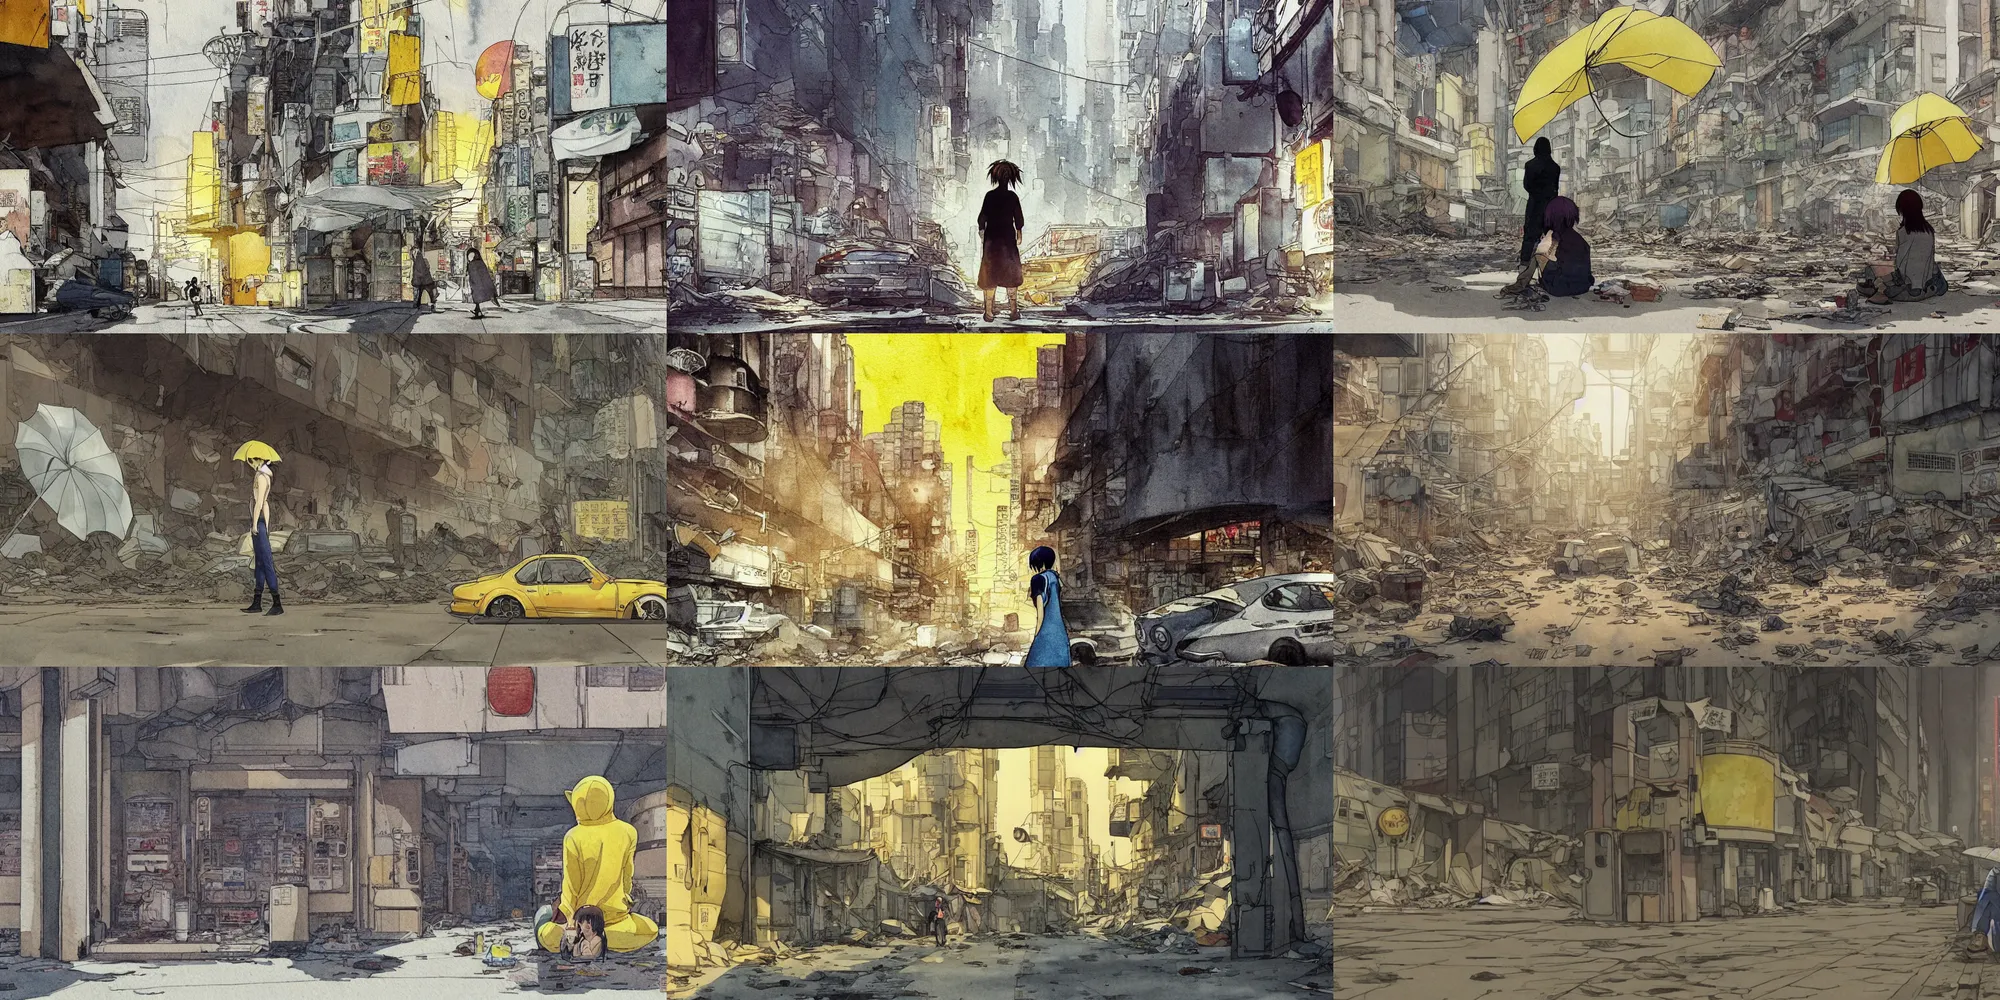 Prompt: incredible curvilinear screenshot, simple watercolor, paper texture, katsuhiro otomo ghost in the shell movie scene, distant shot of hoody girl side view sitting under a yellow parasol in deserted dusty shinjuku junk town, A titanic cruise liner crashes through a building, broken vending machines, old pawn shop, bright sun bleached ground, mud, fog, dust, windy, scary chameleon face muscle robot monster lurks in the background, big robot hand, robot ghost mask, teeth, animatronic, black smoke, pale beige sky, junk tv, texture, strange, impossible, fur, spines, mouth, pipe brain, shell, brown mud, dust, bored expression, overhead wires, telephone pole, dusty, dry, pencil marks, genius party,shinjuku, koju morimoto, katsuya terada, masamune shirow, tatsuyuki tanaka , hd, 4k, remaster, dynamic camera angle, deep 3 point perspective, fish eye, dynamic scene